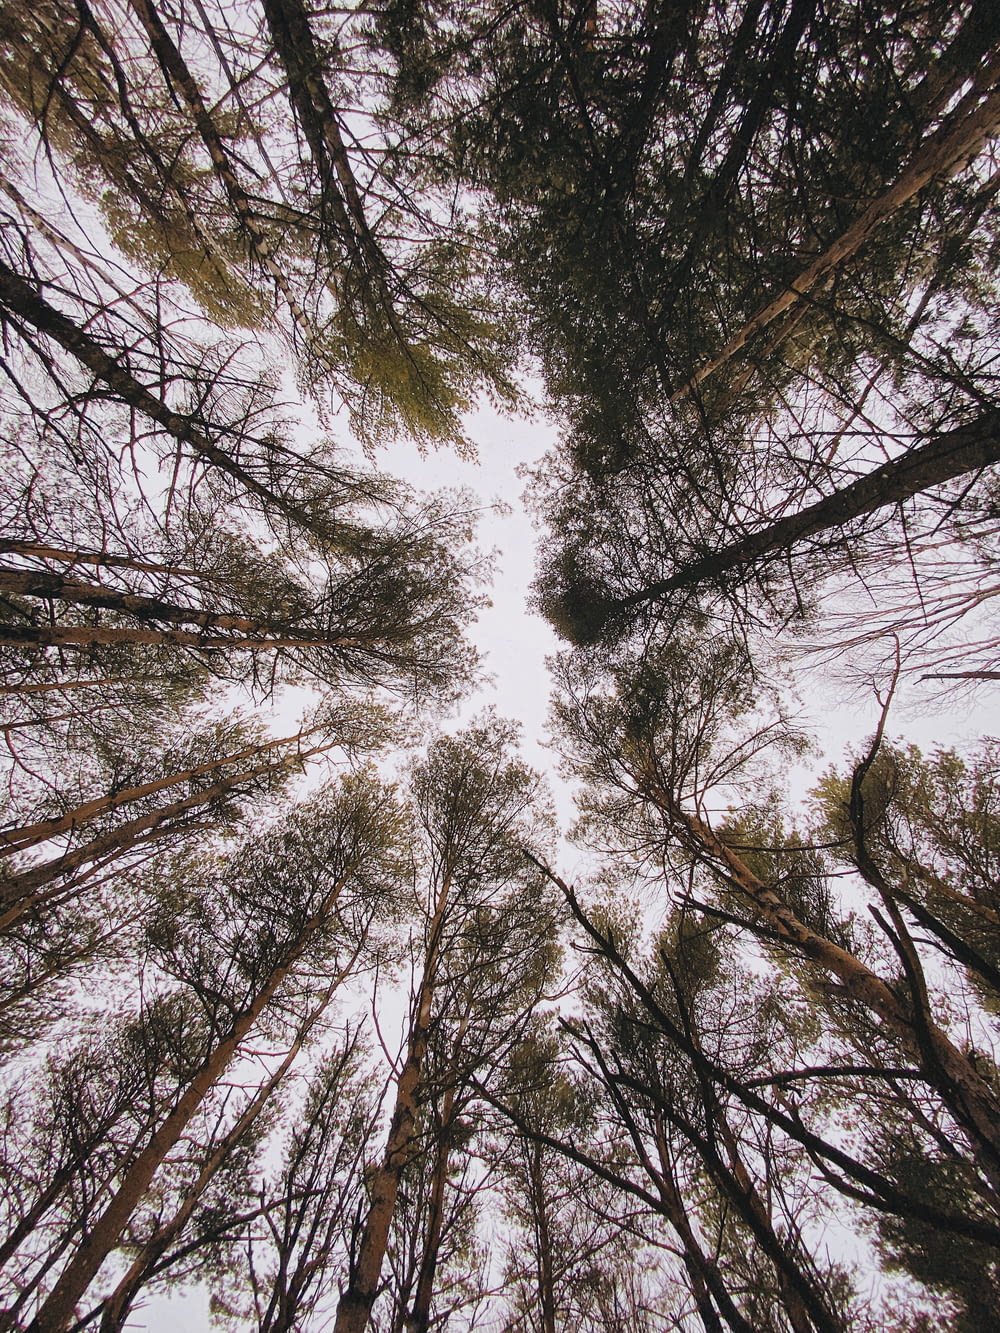 looking up at the tops of tall trees